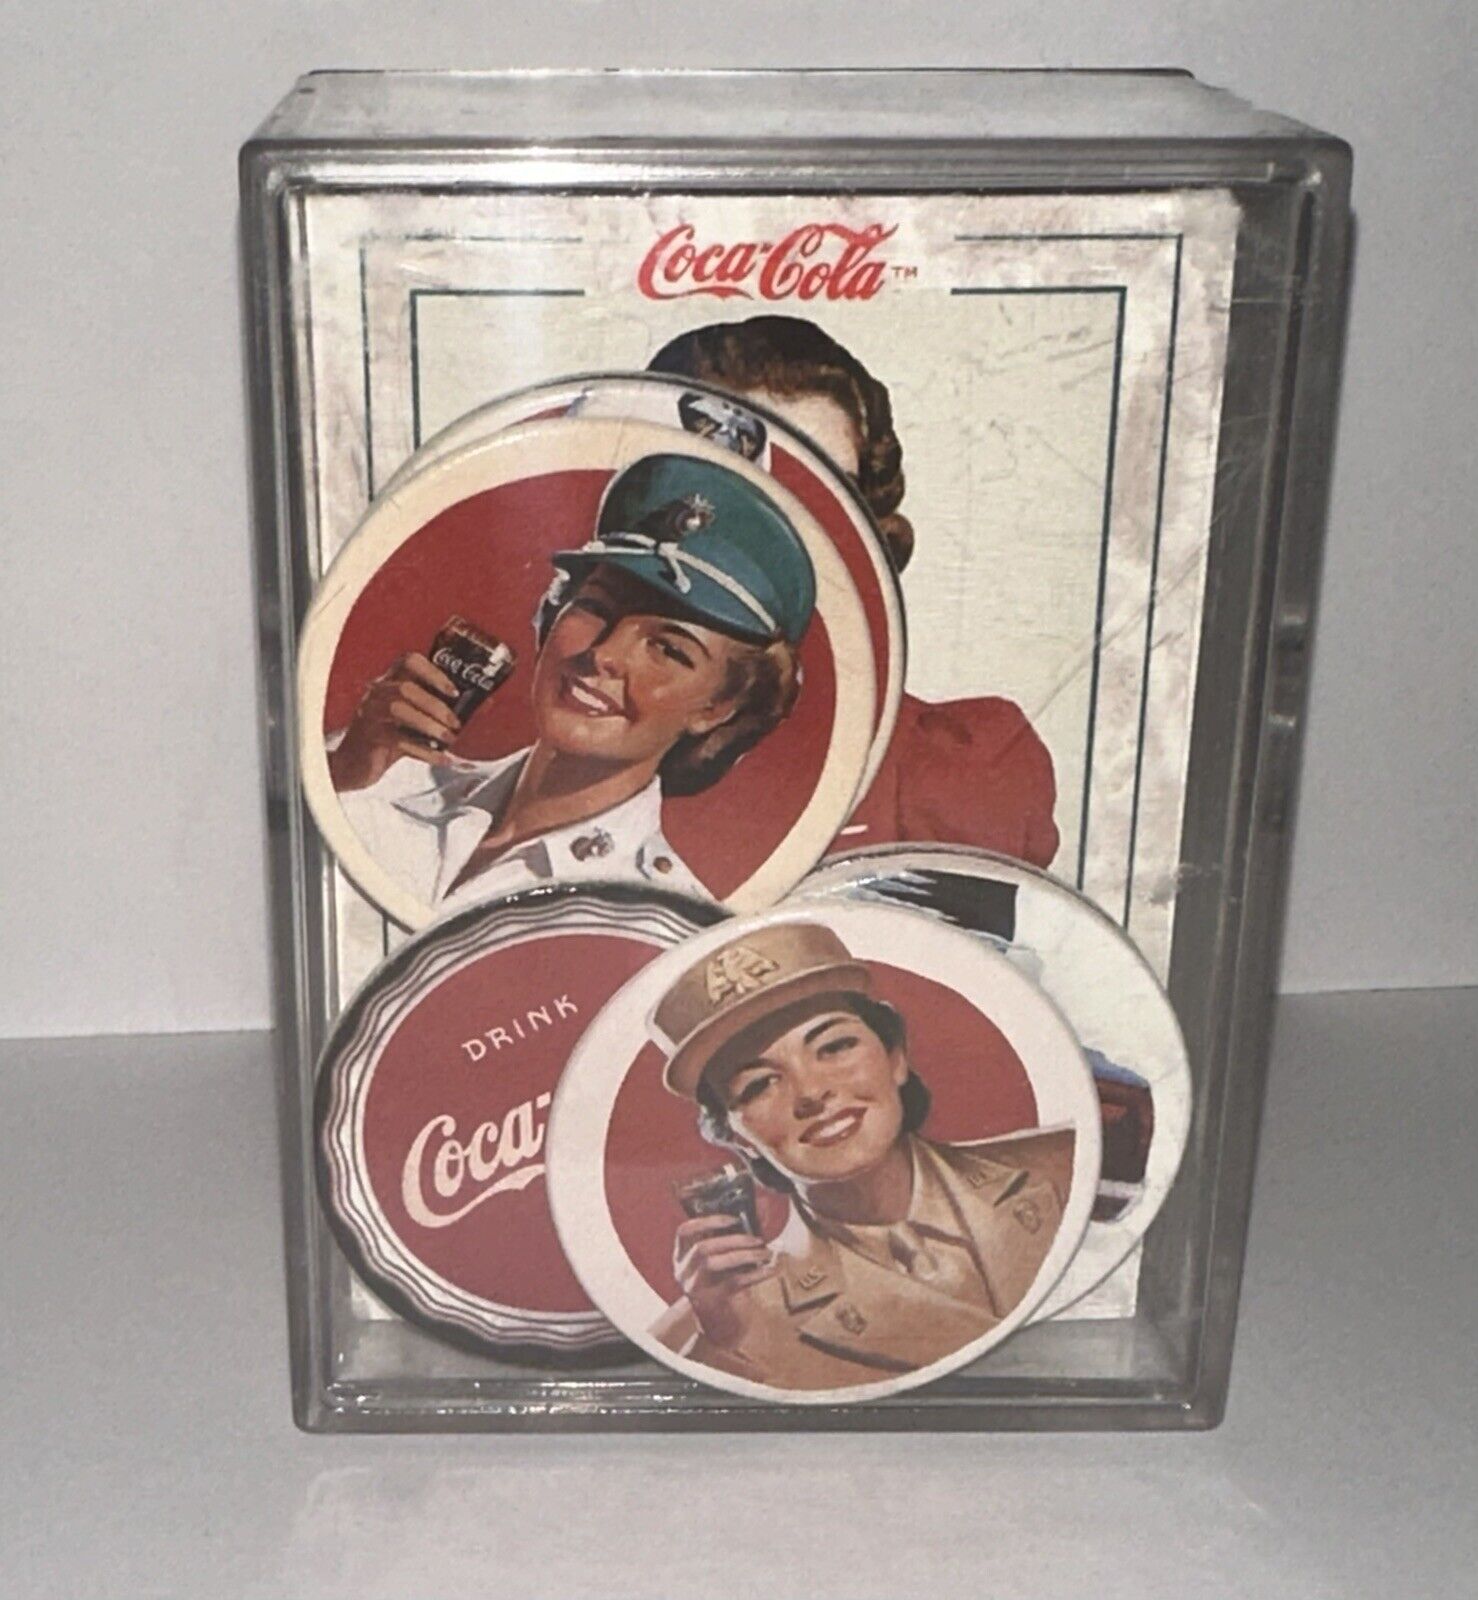 COCA-COLA SERIES 2 Collect-A-Card/1994 Complete Card Set 101-200 + 1-8 Caps New